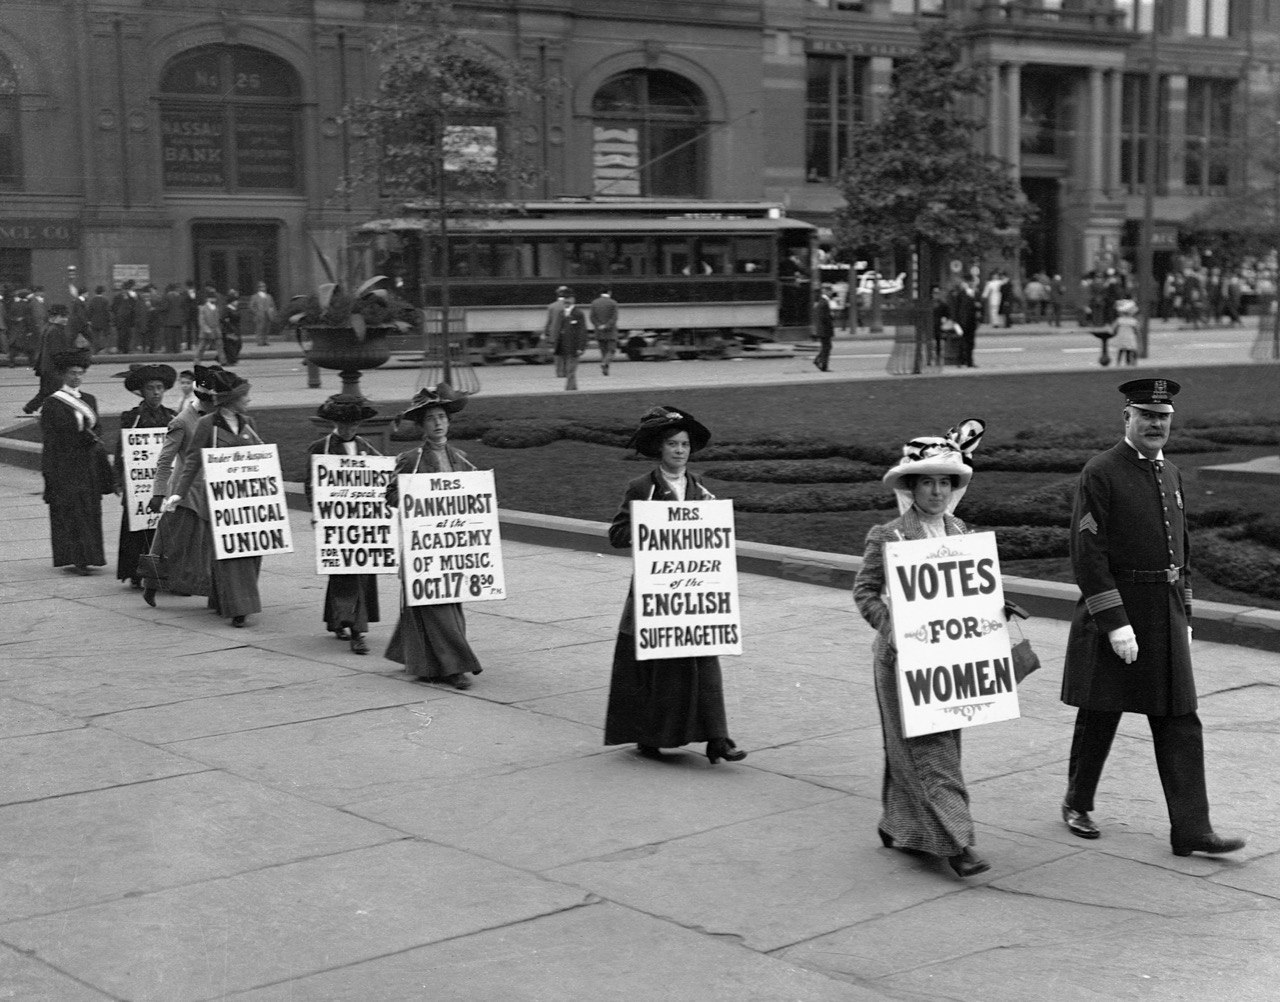   Suffragettes parade down Bedford Avenue in Brooklyn wearing signs reading "Votes for Women". 